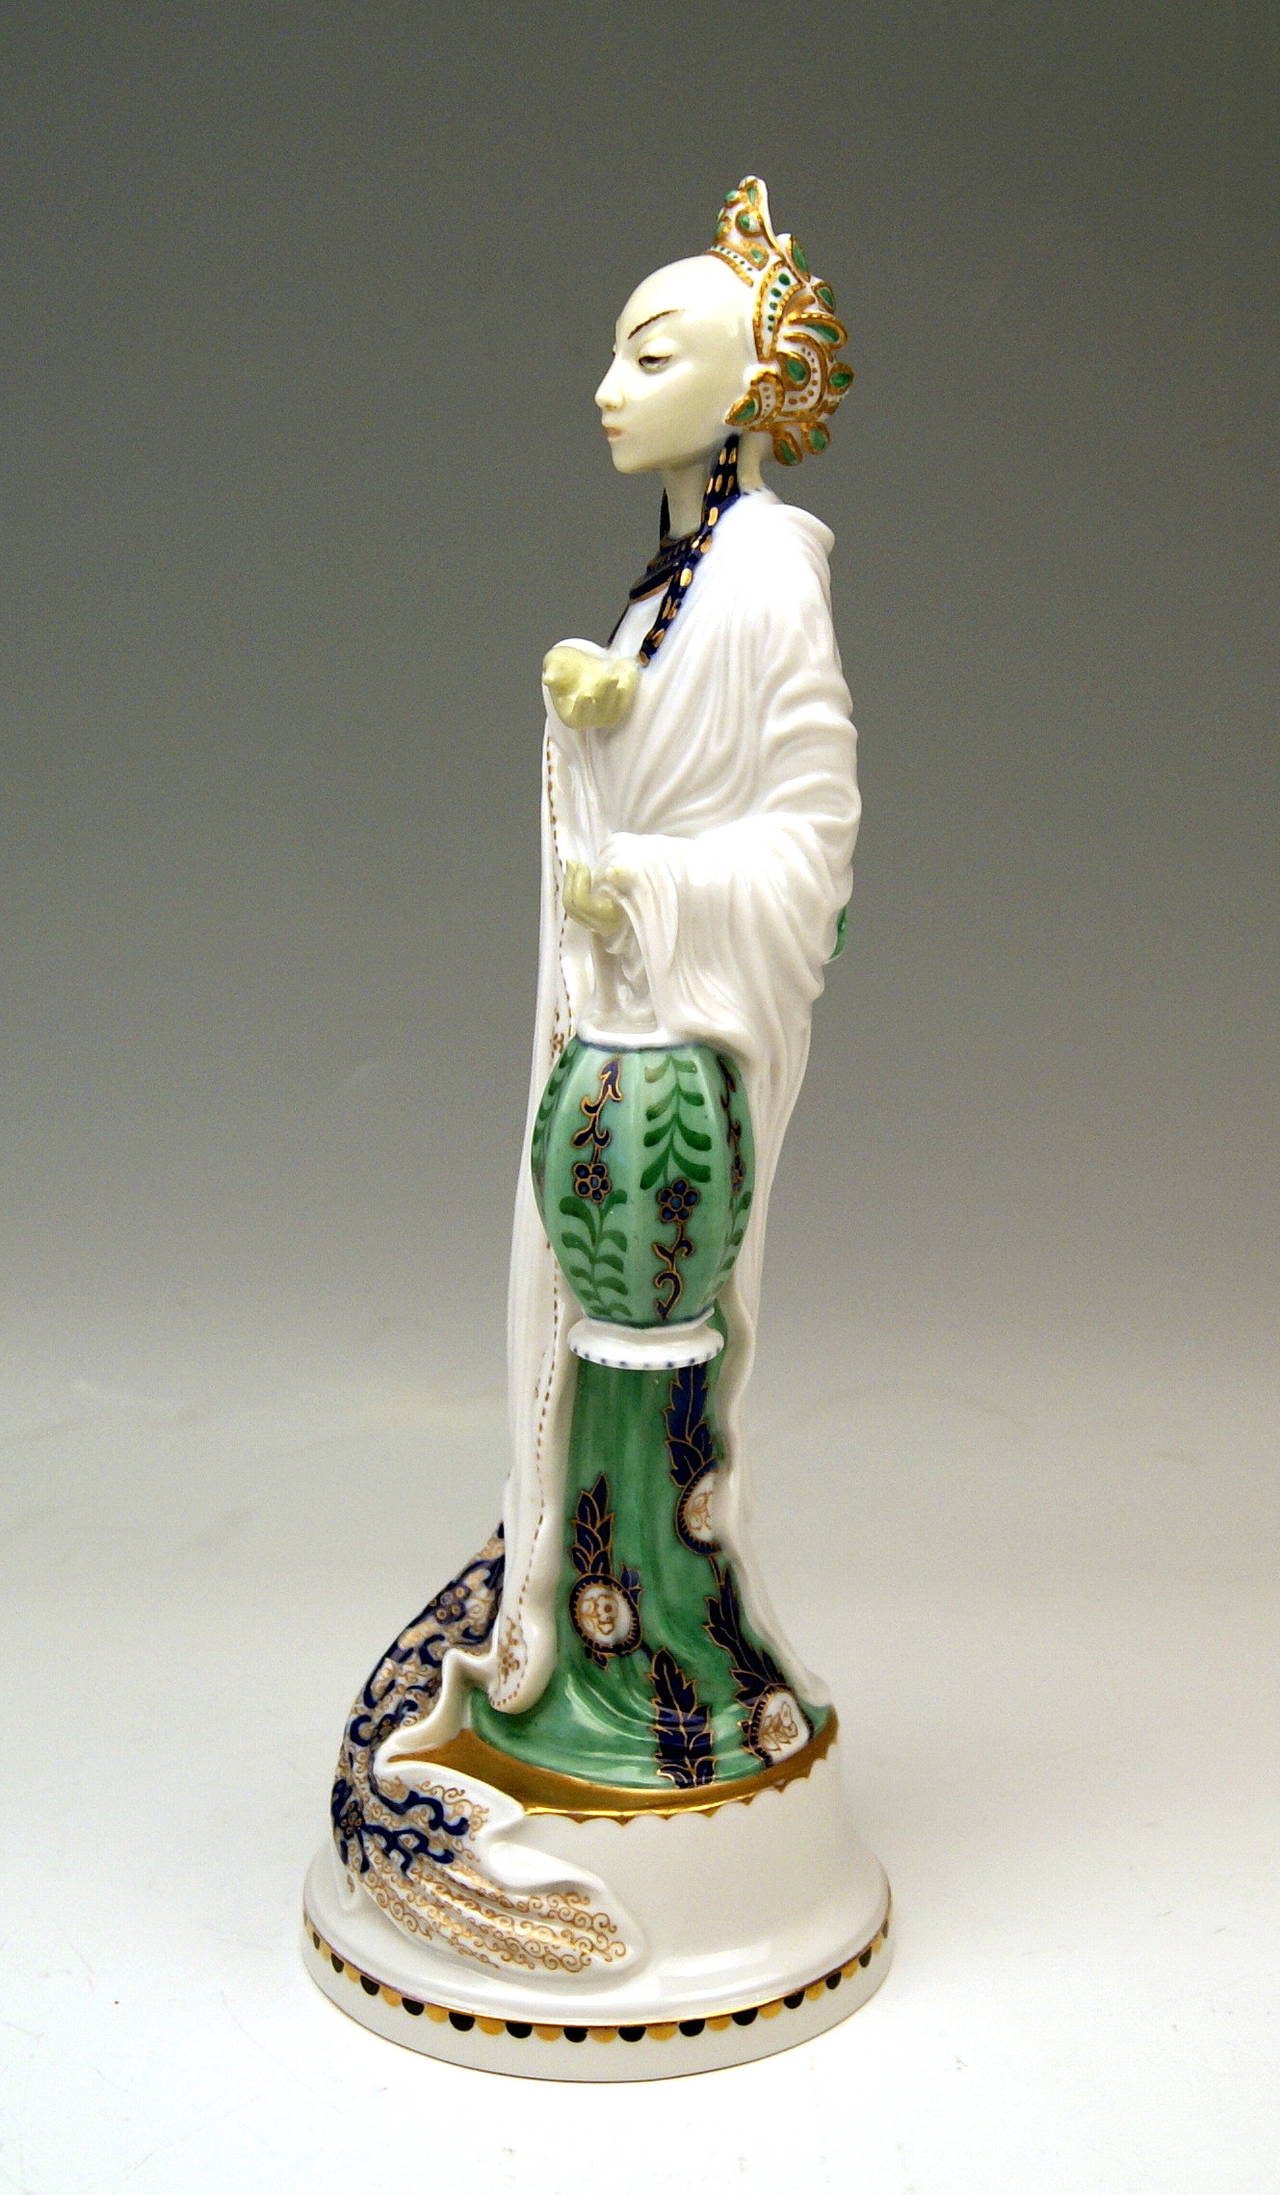 ROSENTHAL RAREST FIGURINE OF A CHINESE LADY:
THE ORIGINAL GERMAN TITLE IS:   TÄNZERIN TSCHAOKIUM   ( = LADY DANCER CHAOKIUM )
The Chinese woman wearing a long dress covered with mantle holds a Chinese lantern in left hand.  The woman's garments